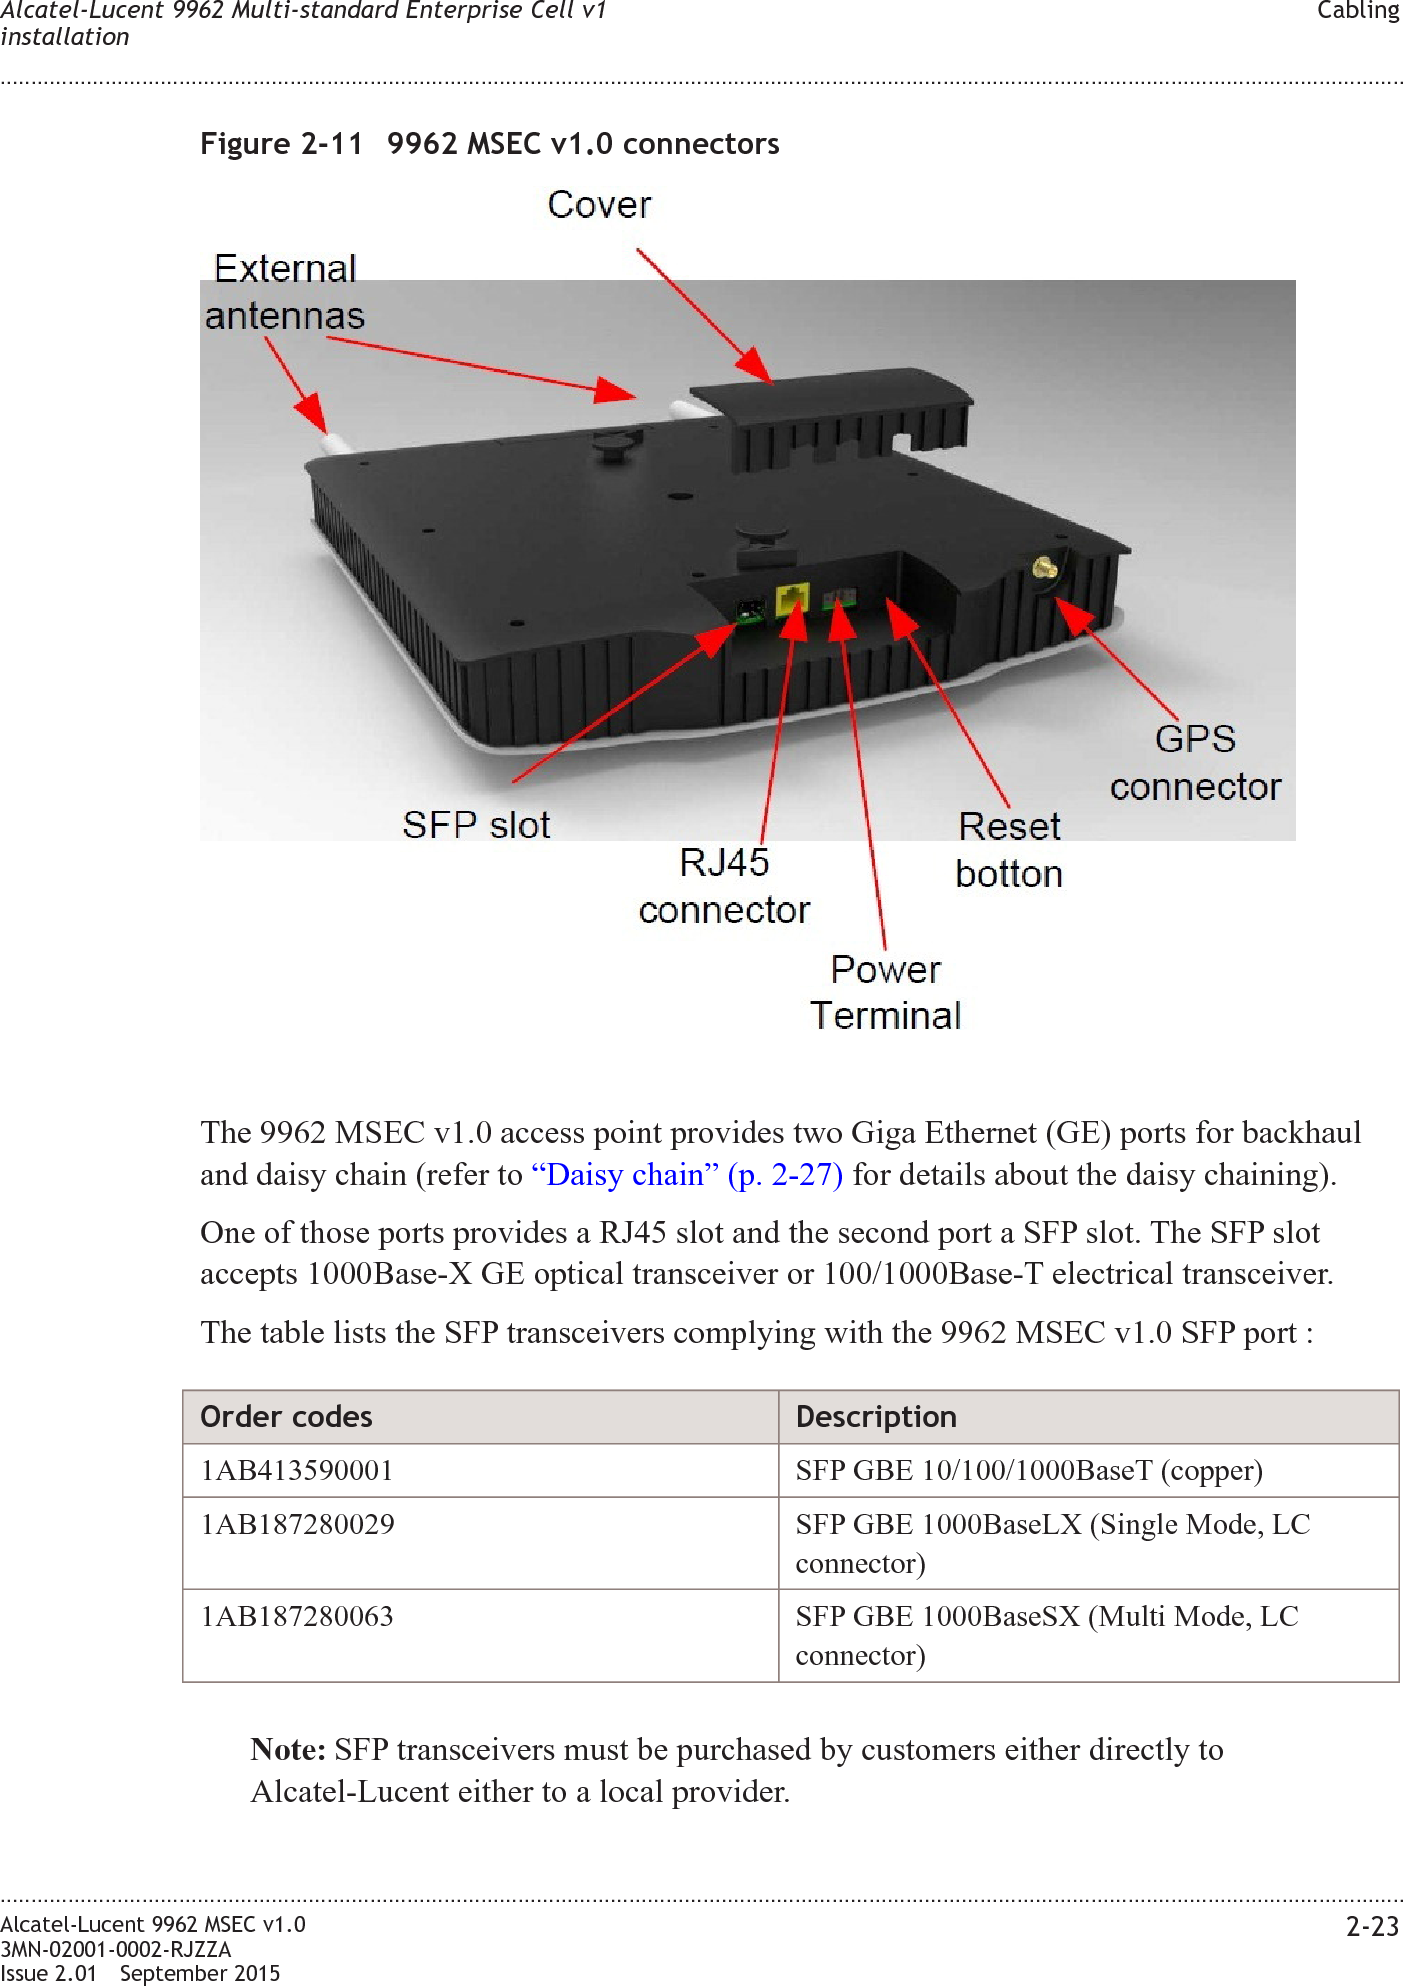 The 9962 MSEC v1.0 access point provides two Giga Ethernet (GE) ports for backhauland daisy chain (refer to “Daisy chain” (p. 2-27) for details about the daisy chaining).One of those ports provides a RJ45 slot and the second port a SFP slot. The SFP slotaccepts 1000Base-X GE optical transceiver or 100/1000Base-T electrical transceiver.The table lists the SFP transceivers complying with the 9962 MSEC v1.0 SFP port :Order codes Description1AB413590001 SFP GBE 10/100/1000BaseT (copper)1AB187280029 SFP GBE 1000BaseLX (Single Mode, LCconnector)1AB187280063 SFP GBE 1000BaseSX (Multi Mode, LCconnector)Note: SFP transceivers must be purchased by customers either directly toAlcatel-Lucent either to a local provider.Figure 2-11 9962 MSEC v1.0 connectorsAlcatel-Lucent 9962 Multi-standard Enterprise Cell v1installationCabling........................................................................................................................................................................................................................................................................................................................................................................................................................................................................Alcatel-Lucent 9962 MSEC v1.03MN-02001-0002-RJZZAIssue 2.01 September 20152-23PRELIMINARYPRELIMINARY